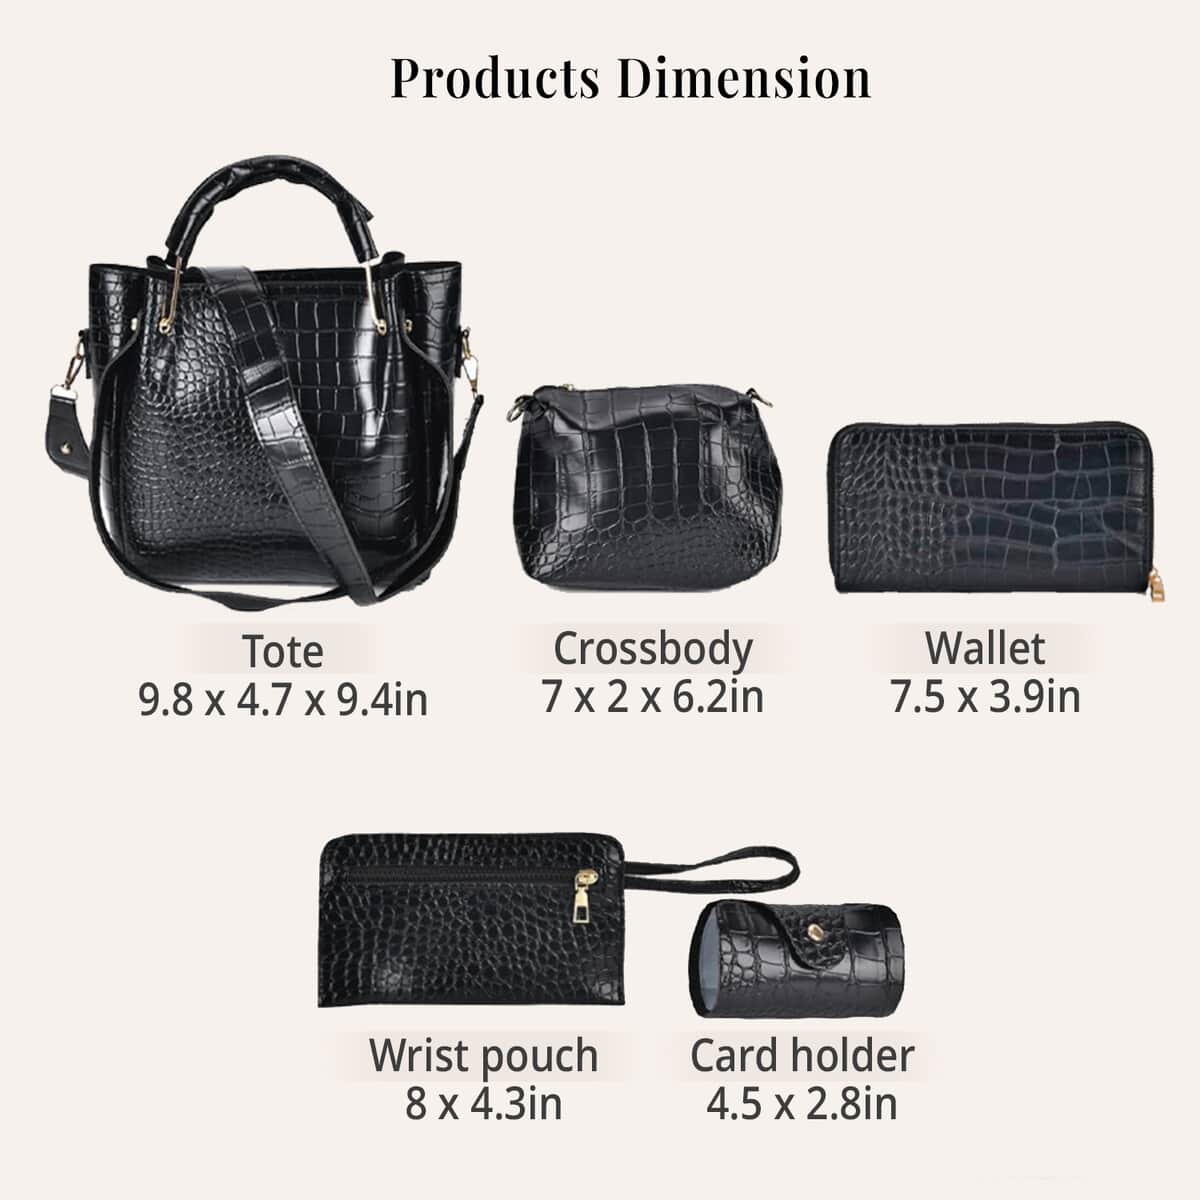 TLV Set of 5pcs Black Crocodile Embossed Faux Leather Tote Bag, Crossbody Bag, Wrist Pouch, Wallet and Card Holder (7.5"x3.9" - 9.8"x4.7"x9.4") image number 6